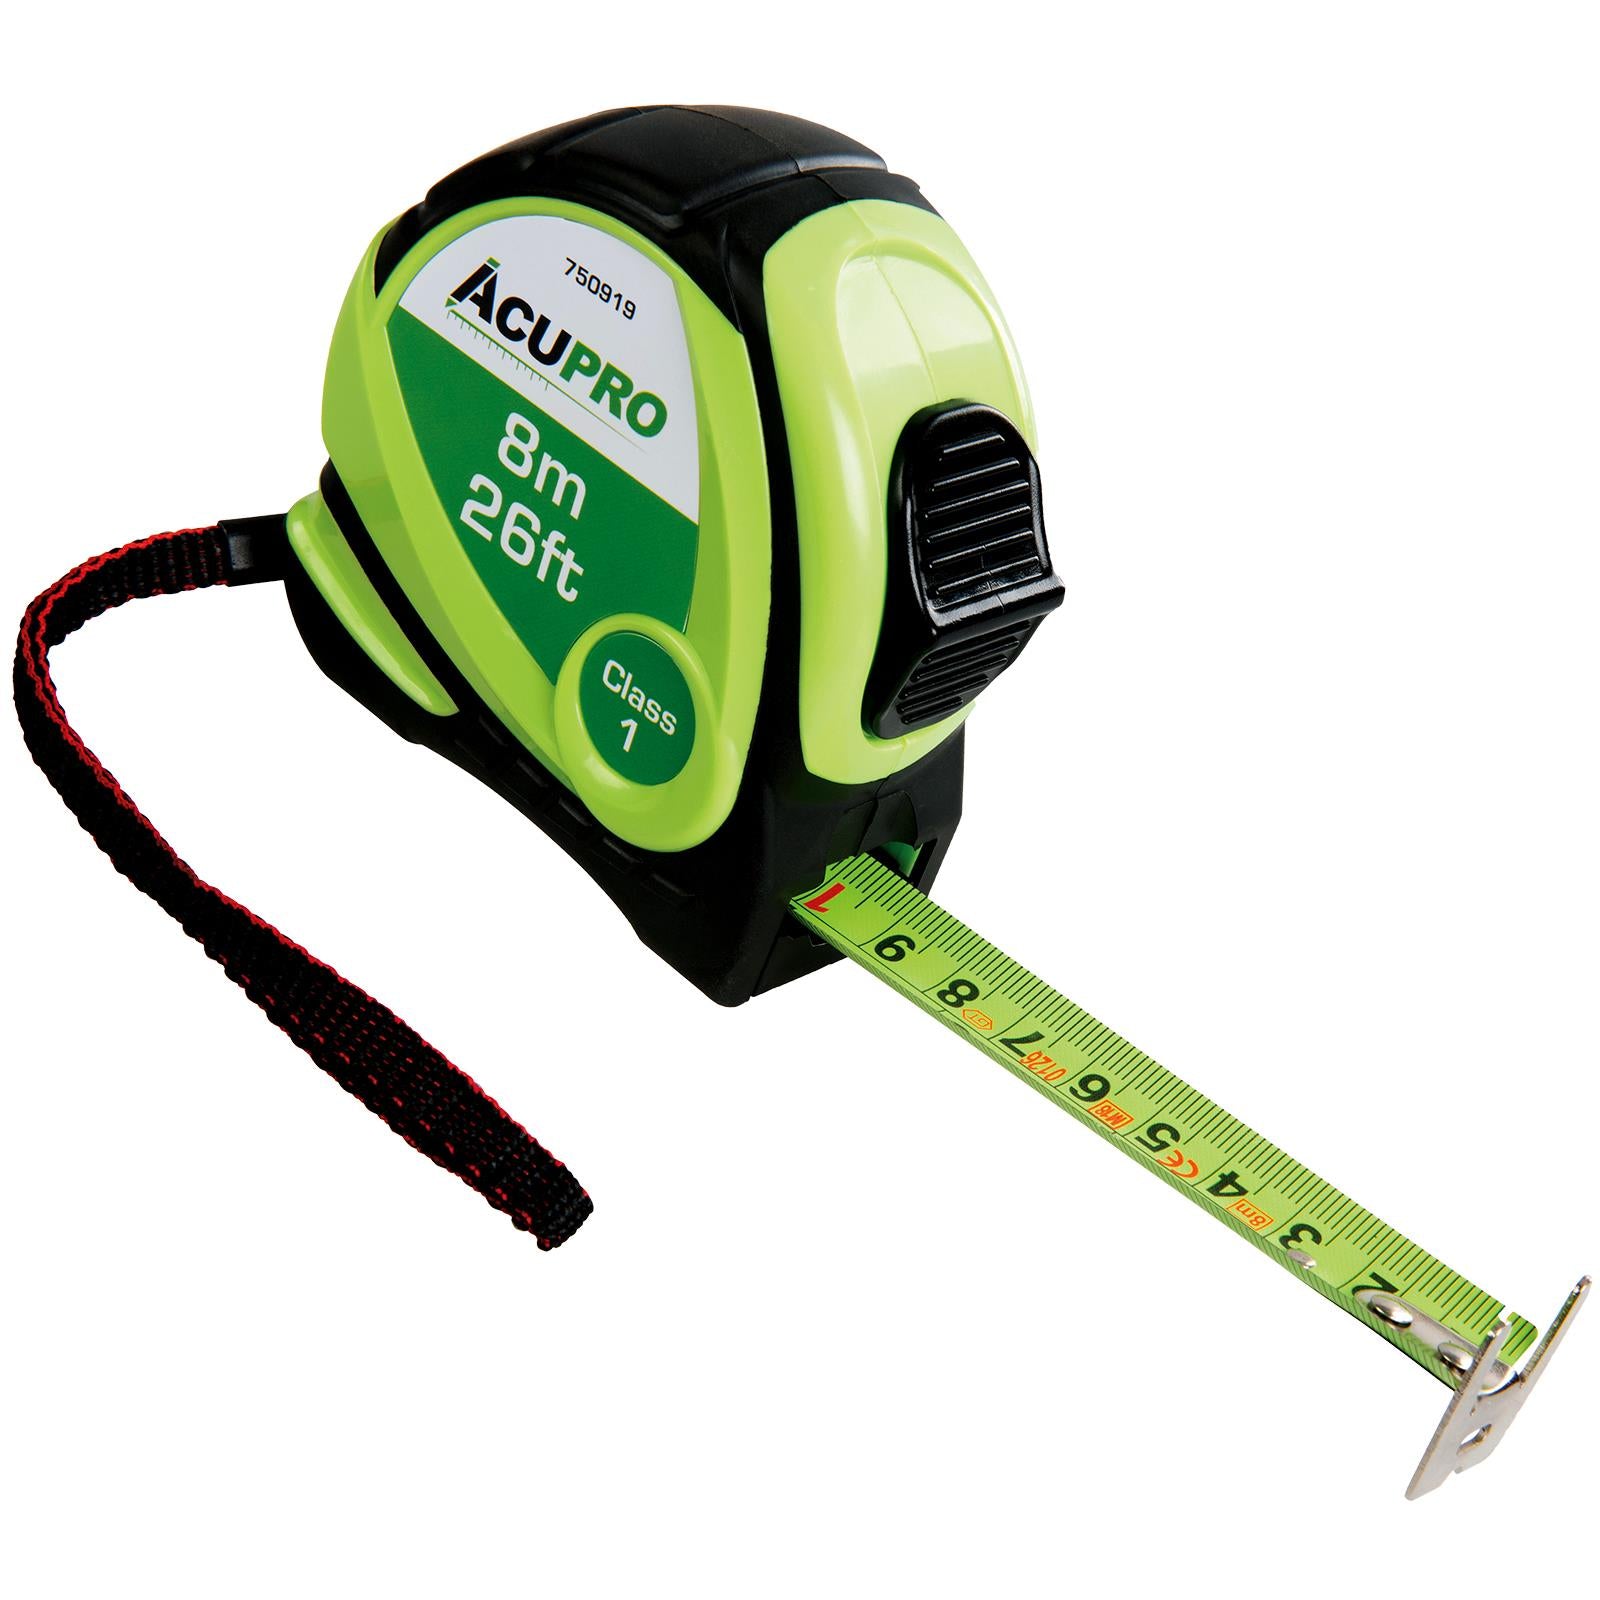 Acupro 3m 5m 8m Tape Measure Class 1 Accuracy Highest Available